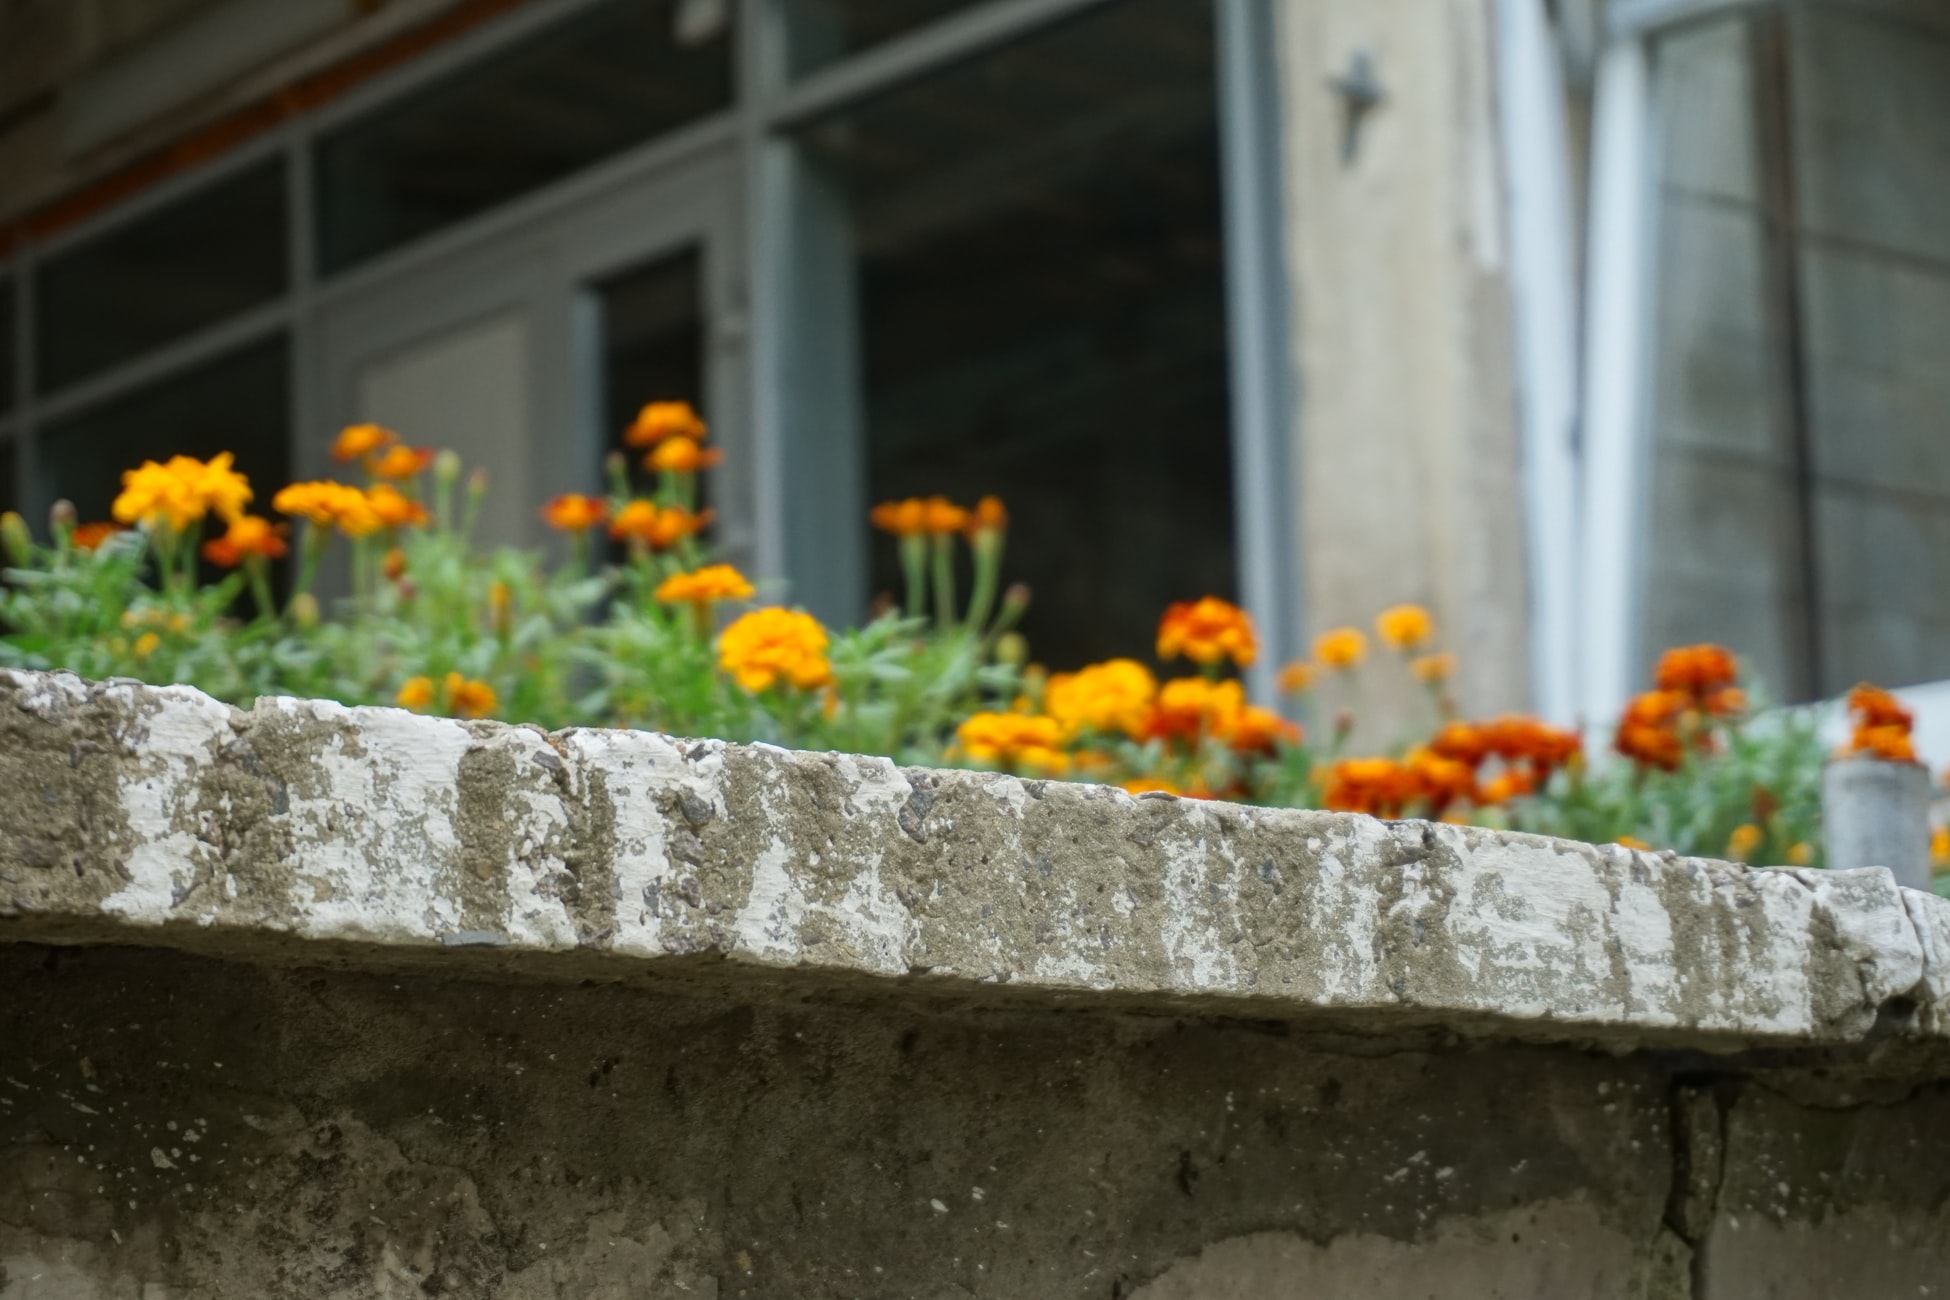 The scent of a marigold will deter plant lice, mosquitoes, and even rabbits. Plant these in flower beds near your front or back doors, or even in your vegetable garden to keep rabbits and mosquitoes from harming your plants.